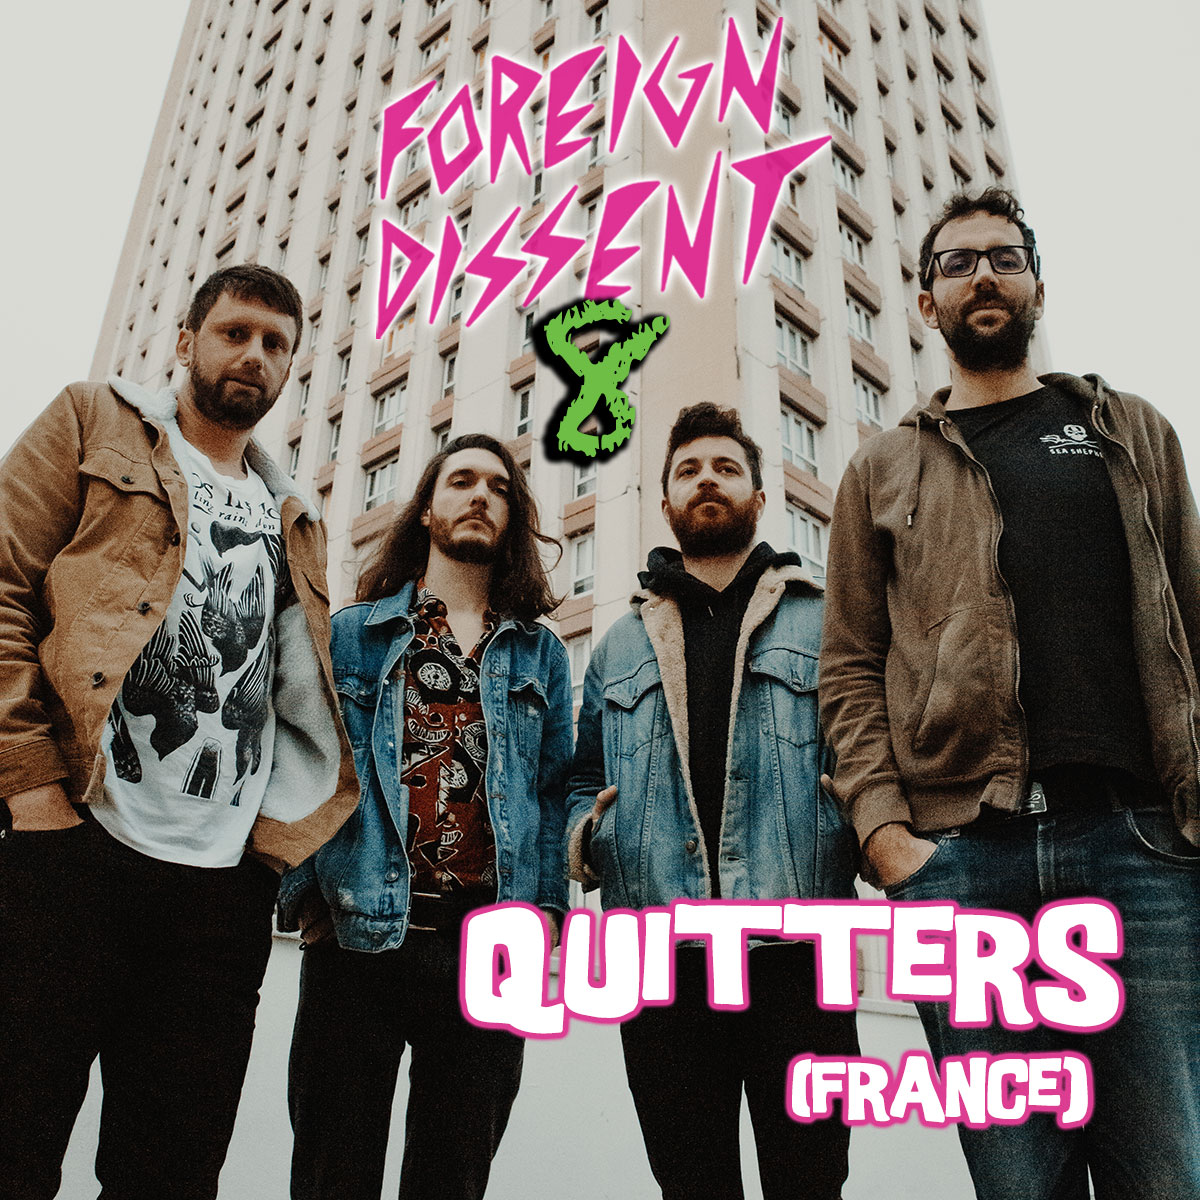 Foreign Dissent 8 featuring Quitters from France